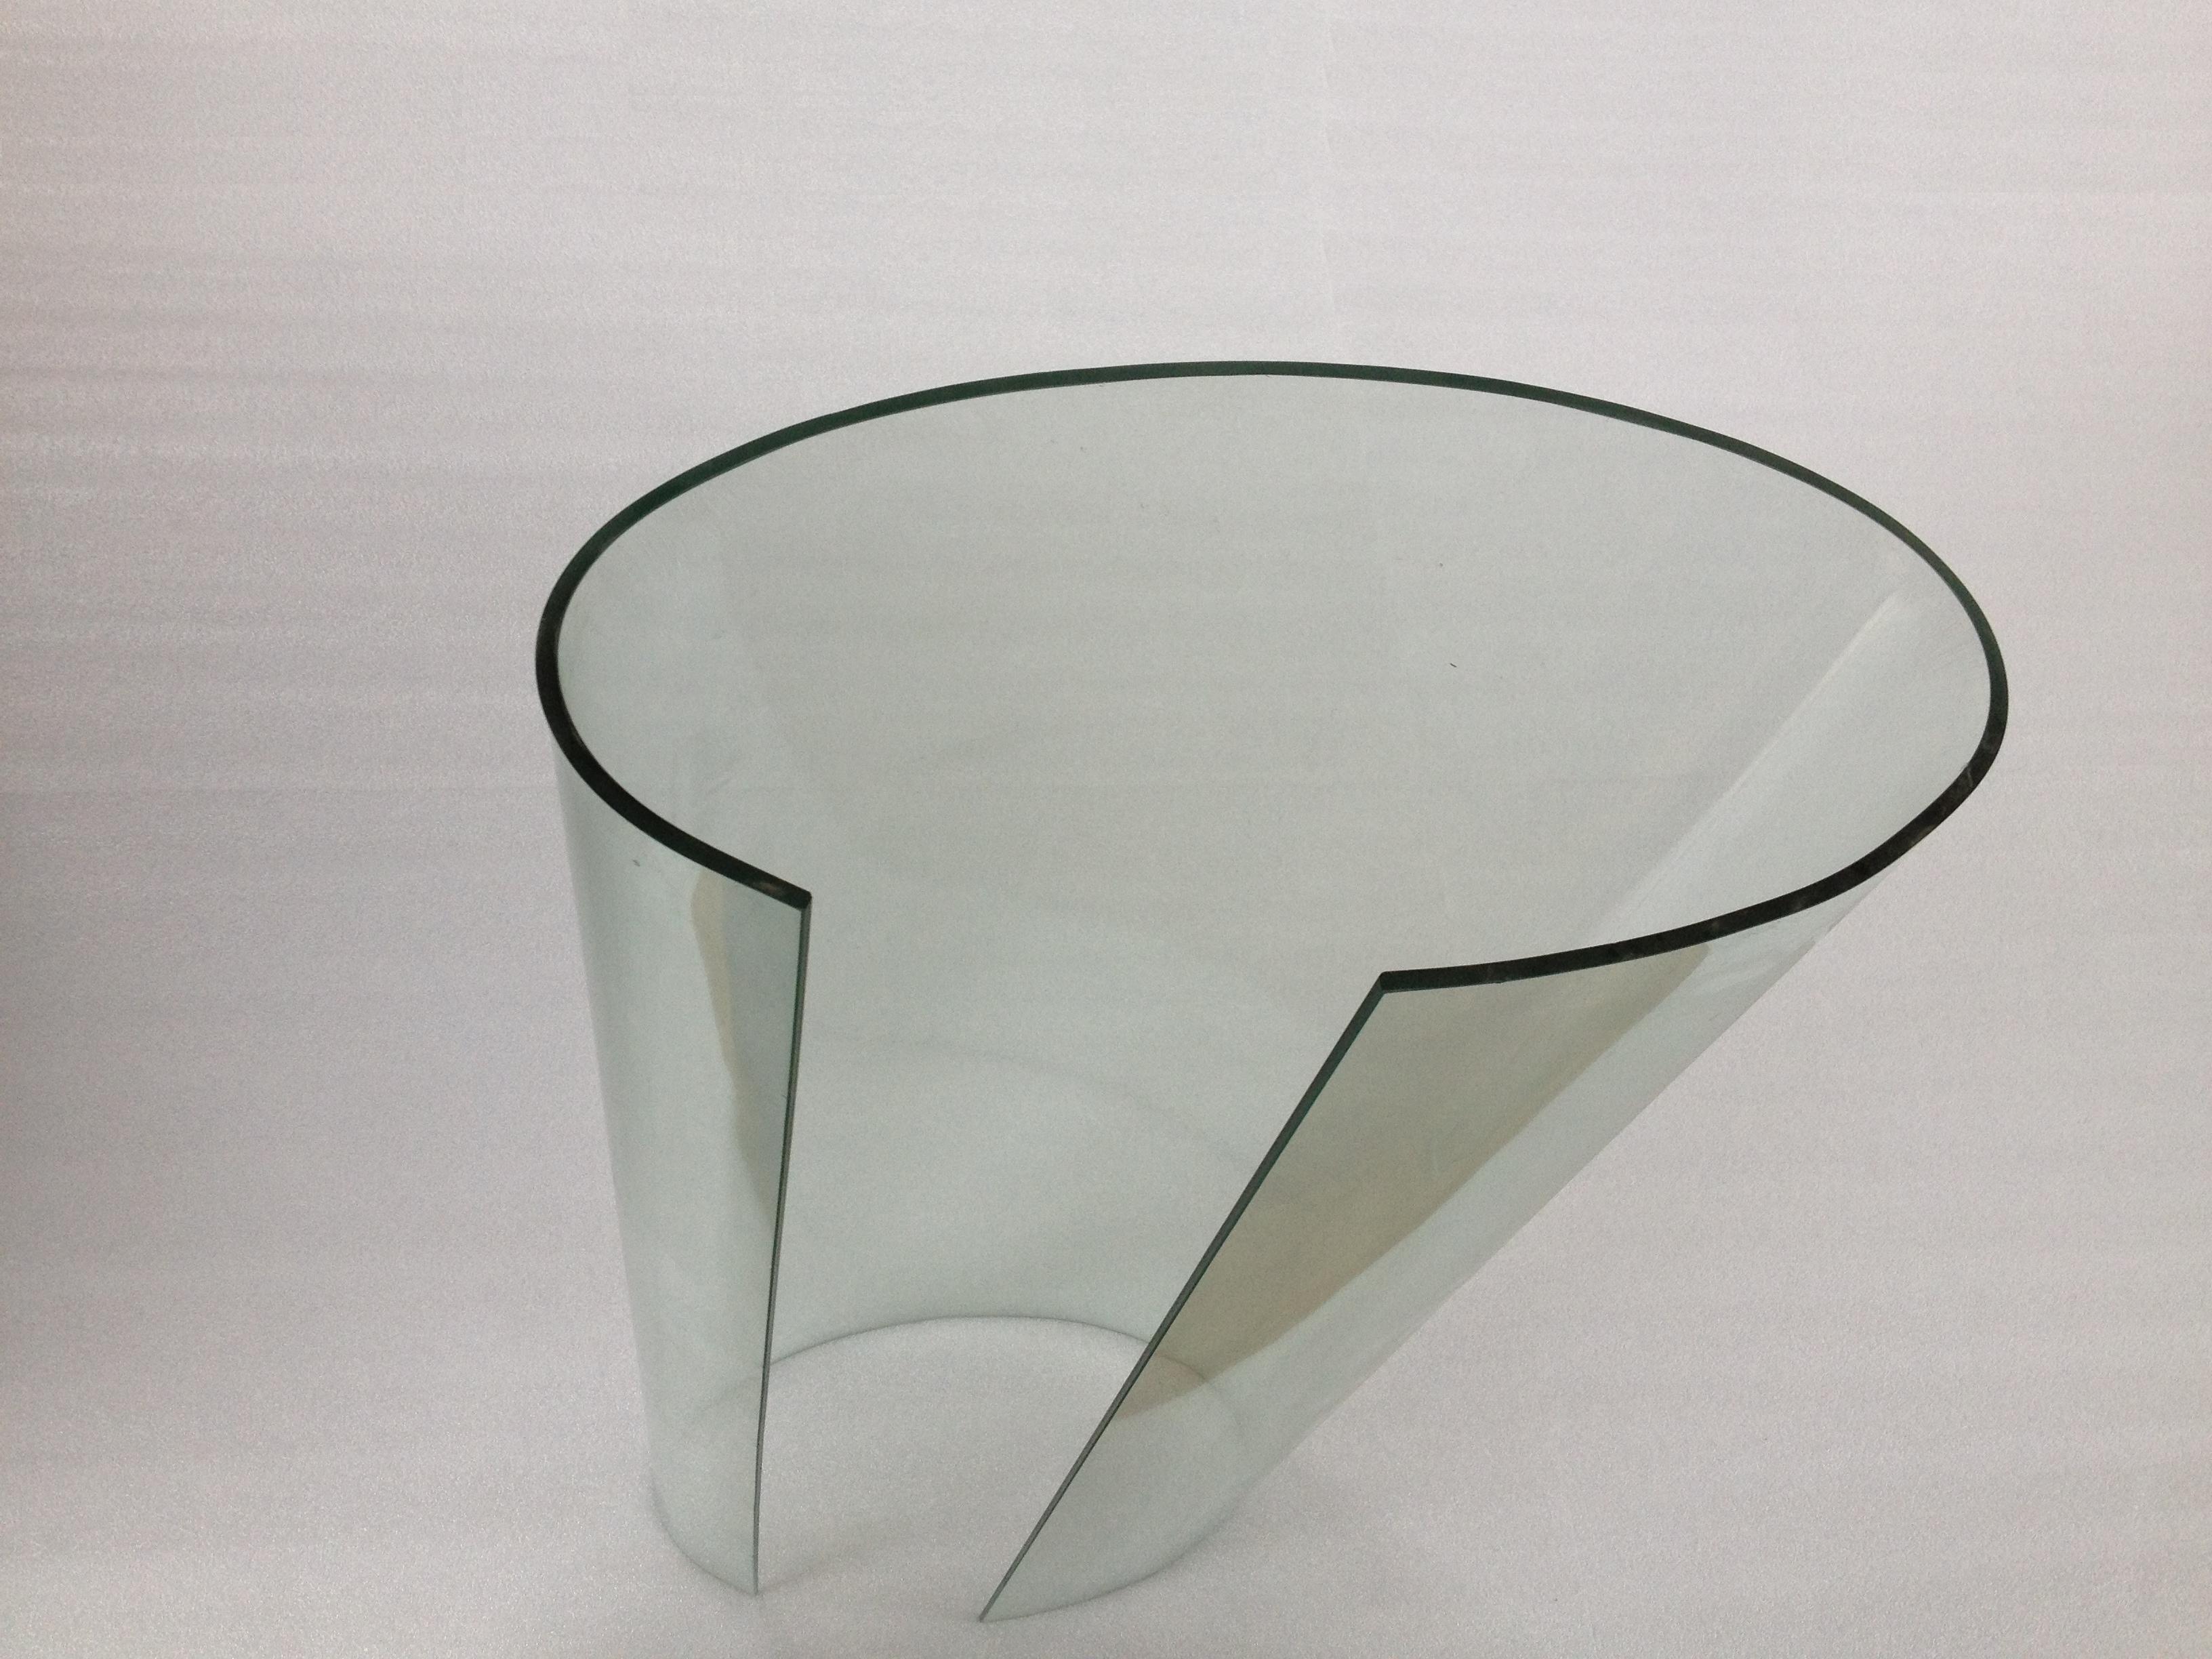 The Selection of Hot Bent Glass Molds